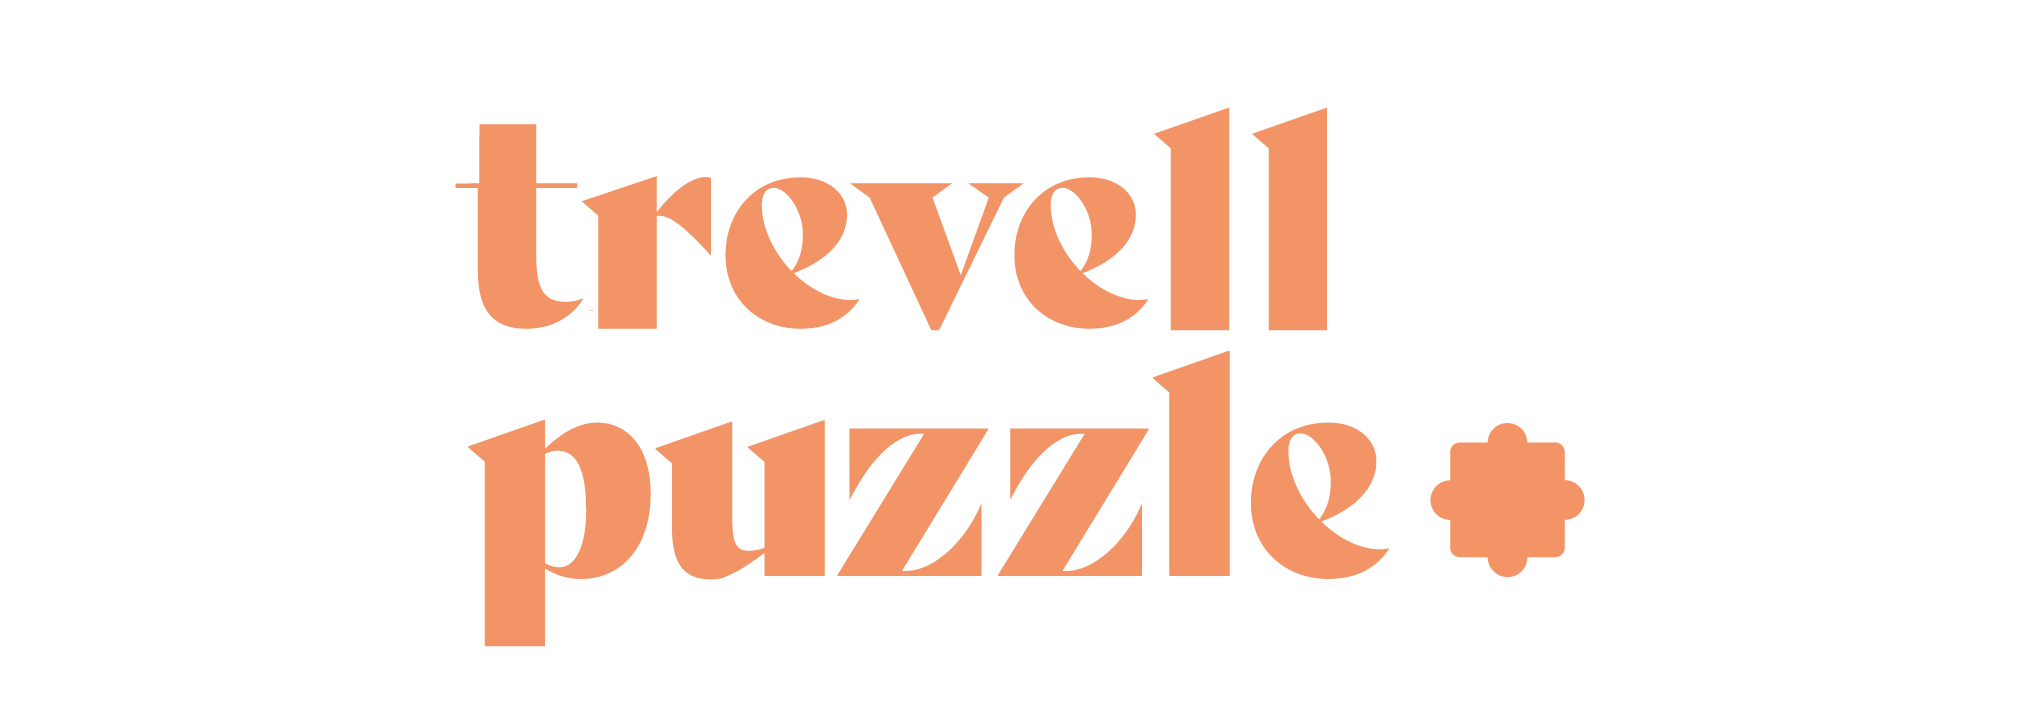 trevell puzzle